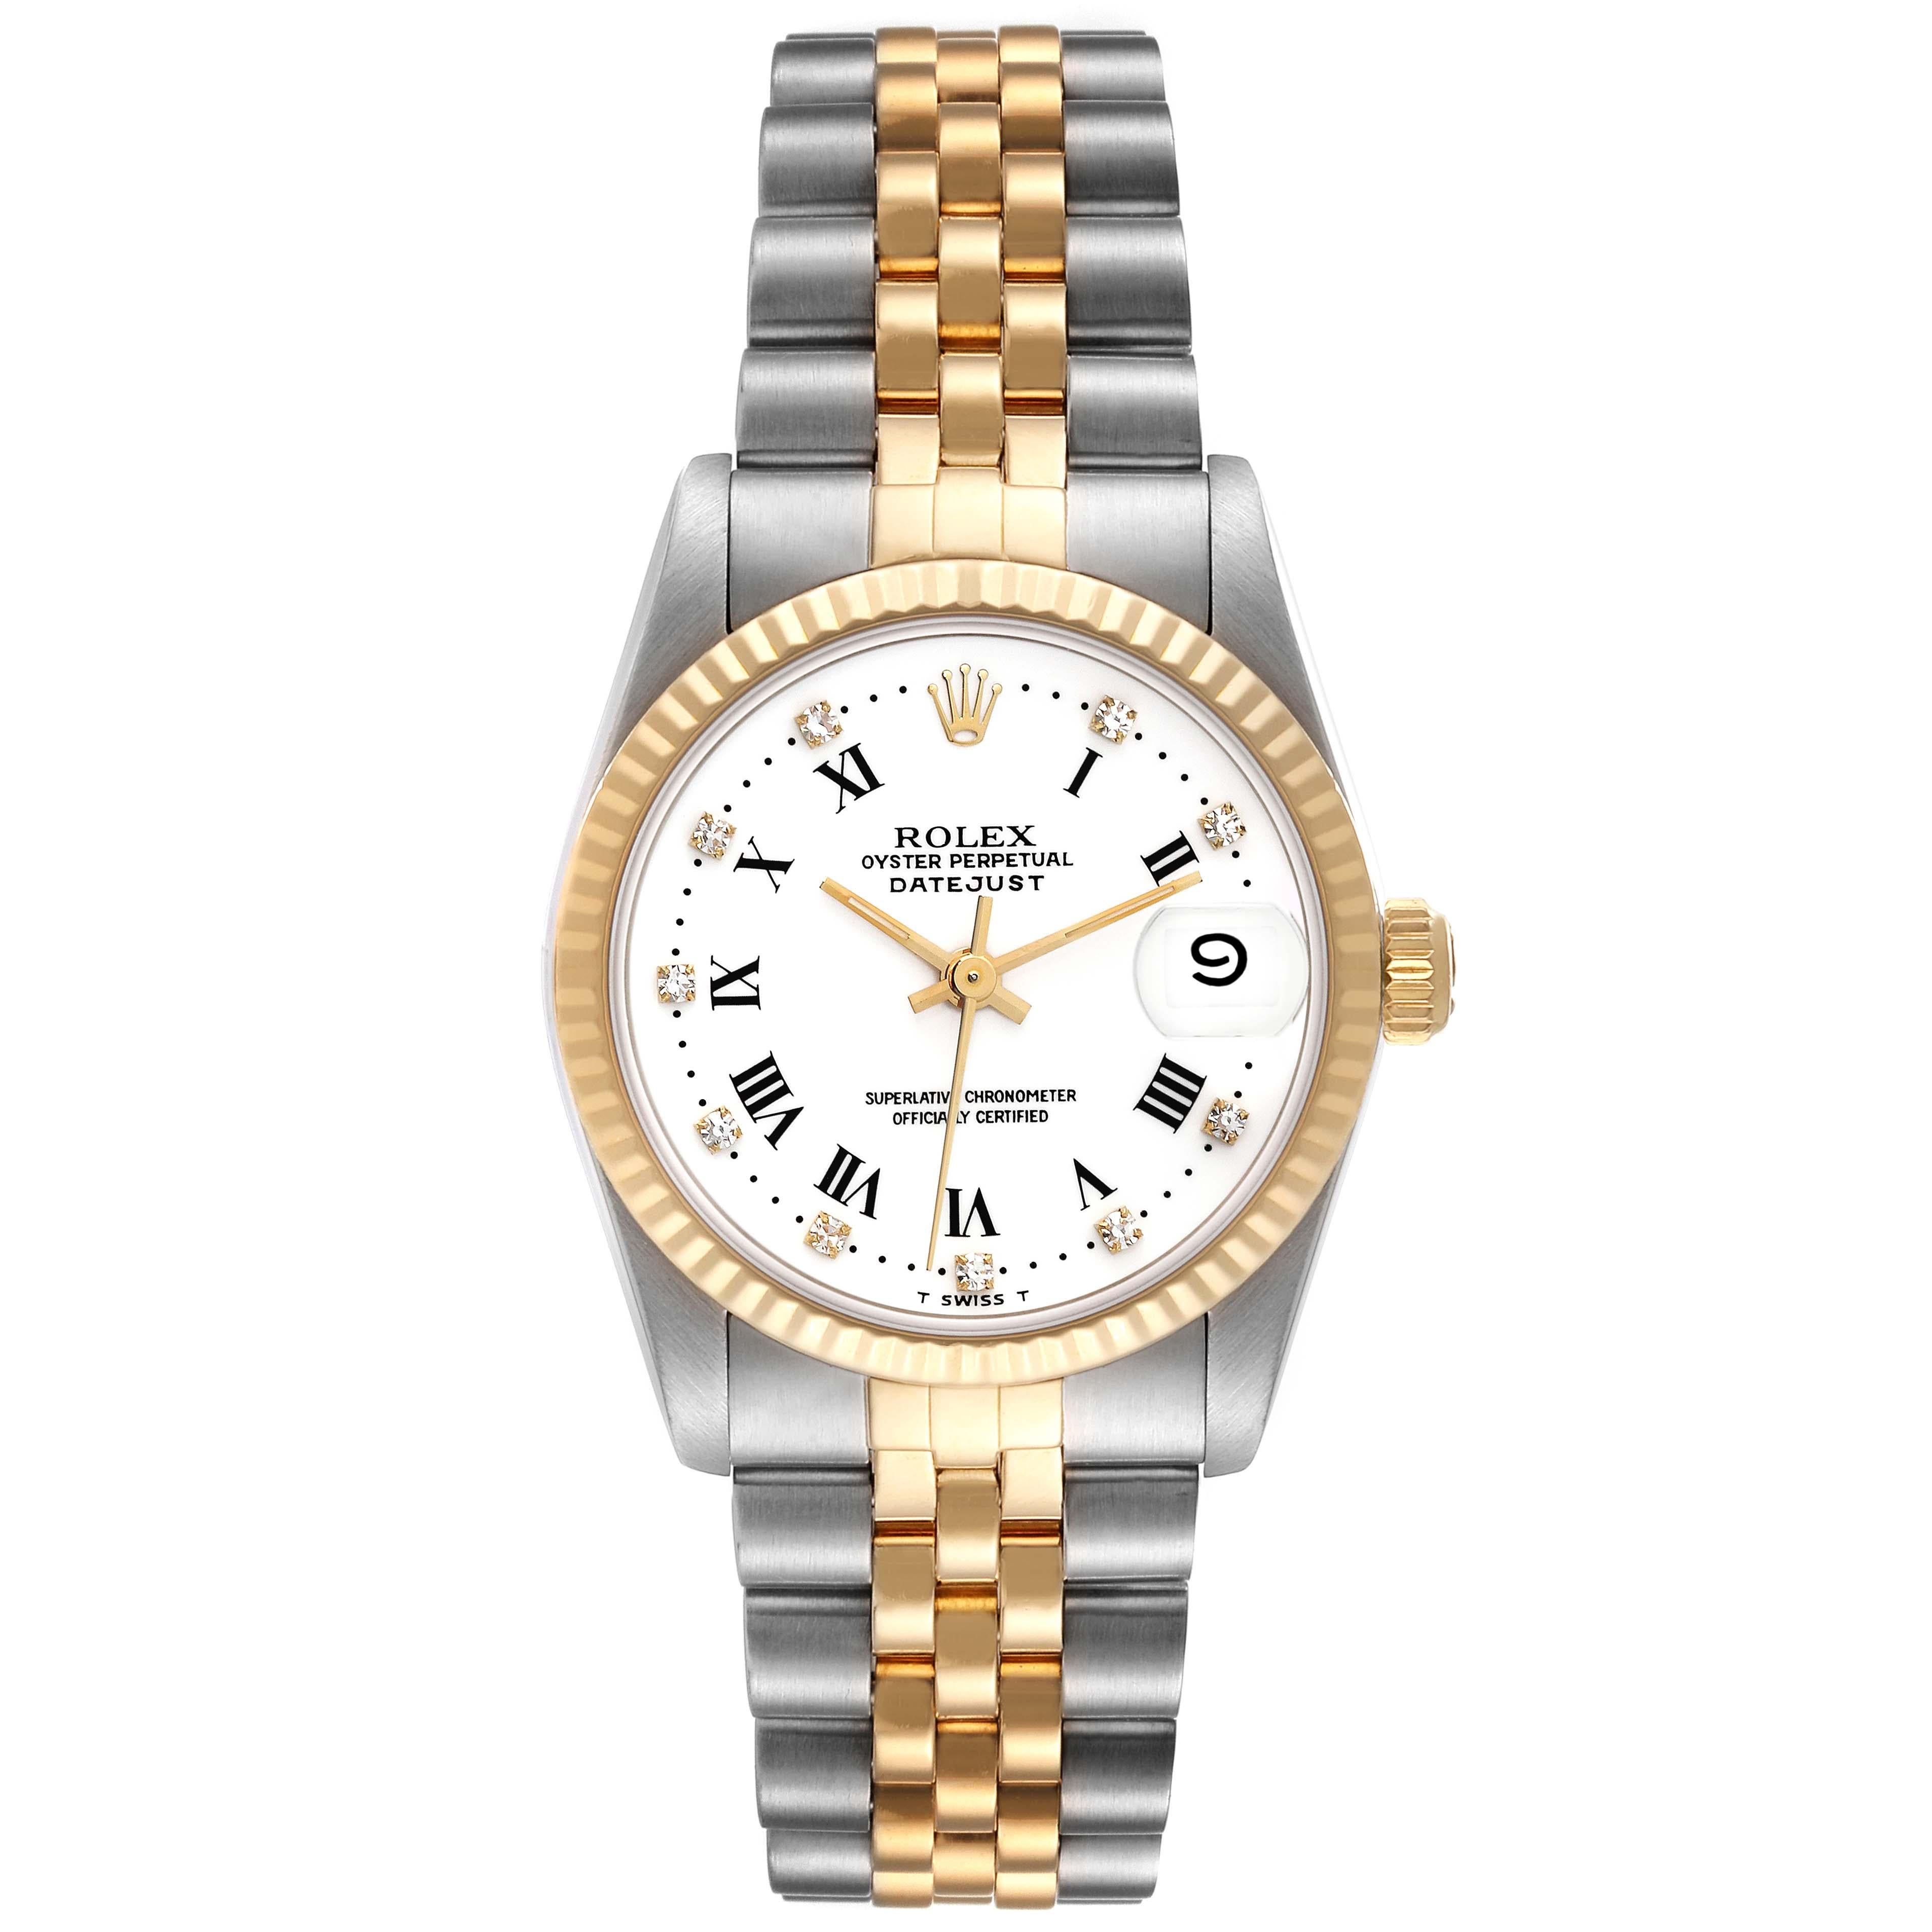 Rolex Datejust Midsize 31mm Steel Yellow Gold Ladies Watch 68273. Officially certified chronometer automatic self-winding movement. Stainless steel oyster case 31 mm in diameter. Rolex logo on an 18K yellow gold crown. 18k yellow gold fluted bezel.